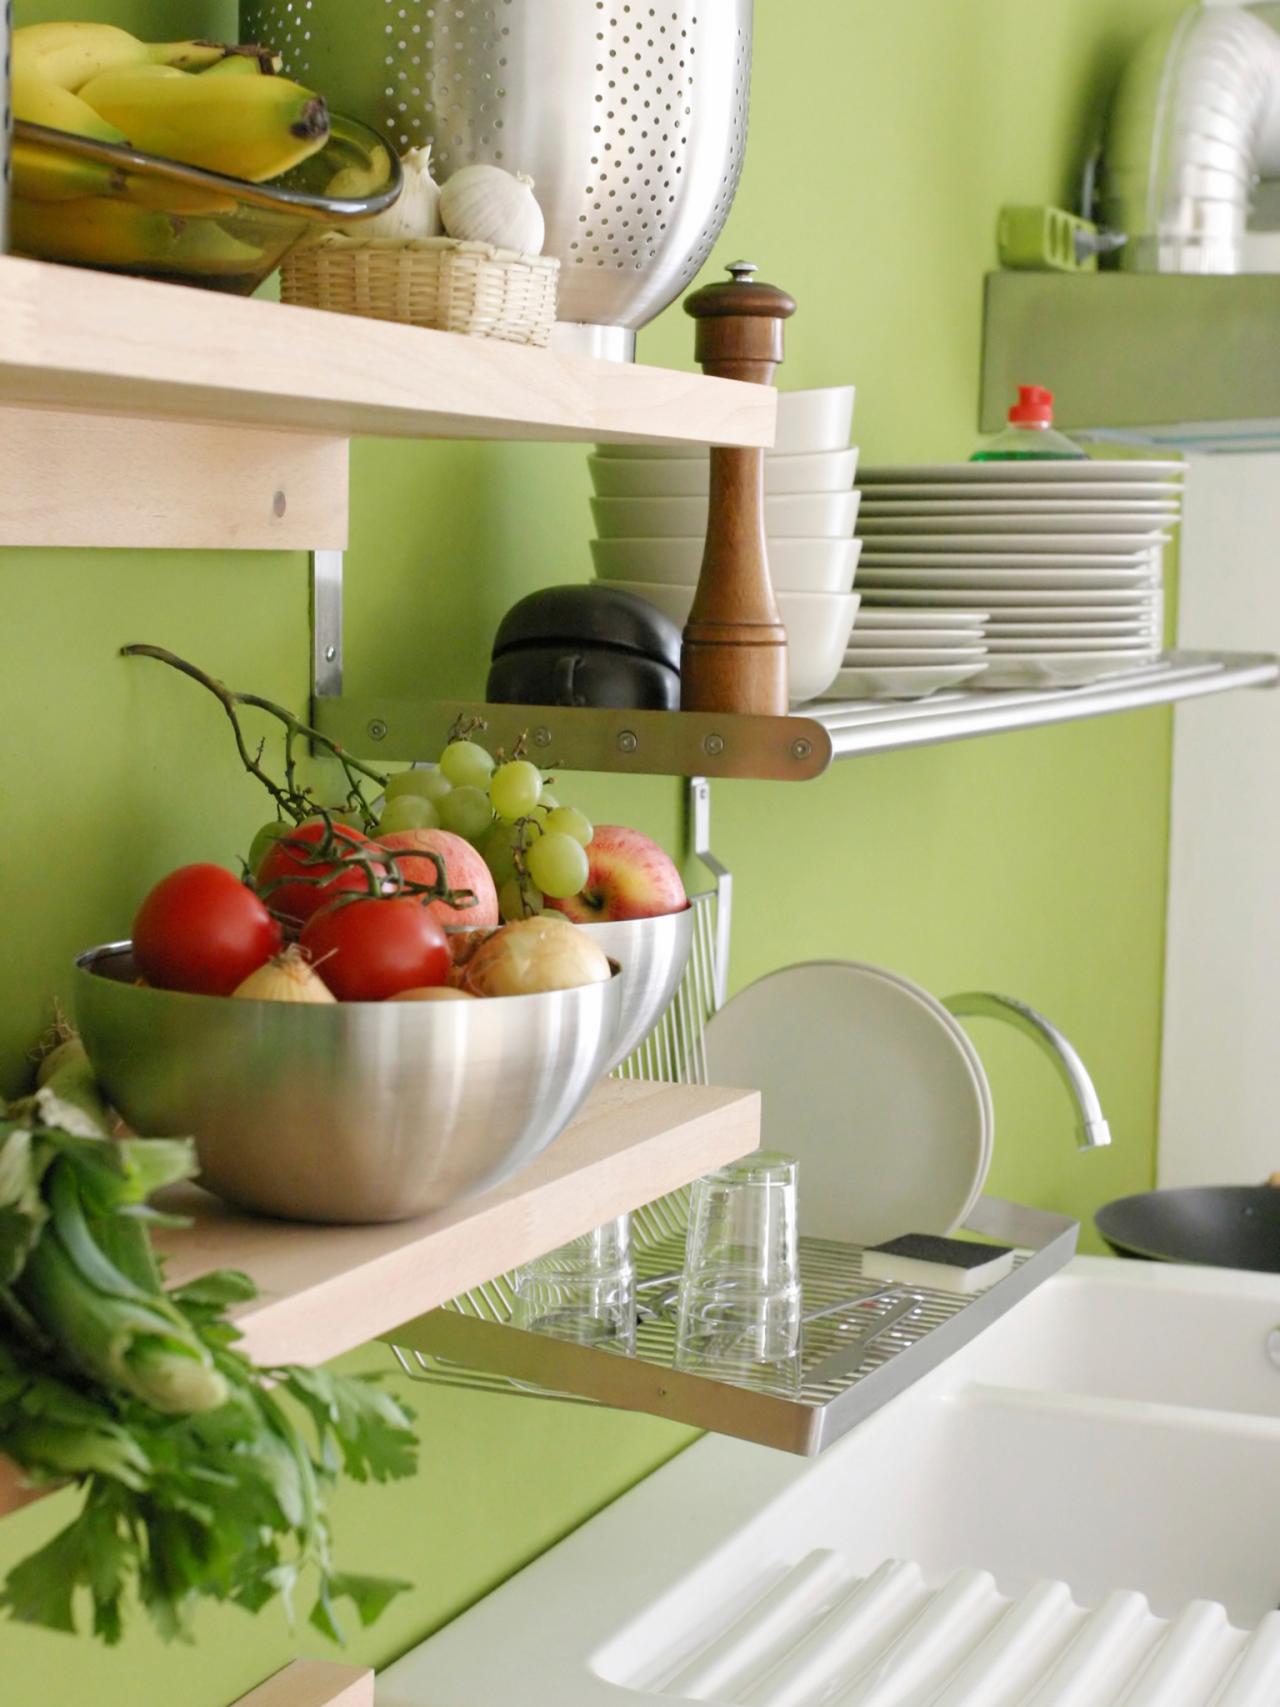 Easy Organizational Solutions for: Kitchens | DIY Network ...